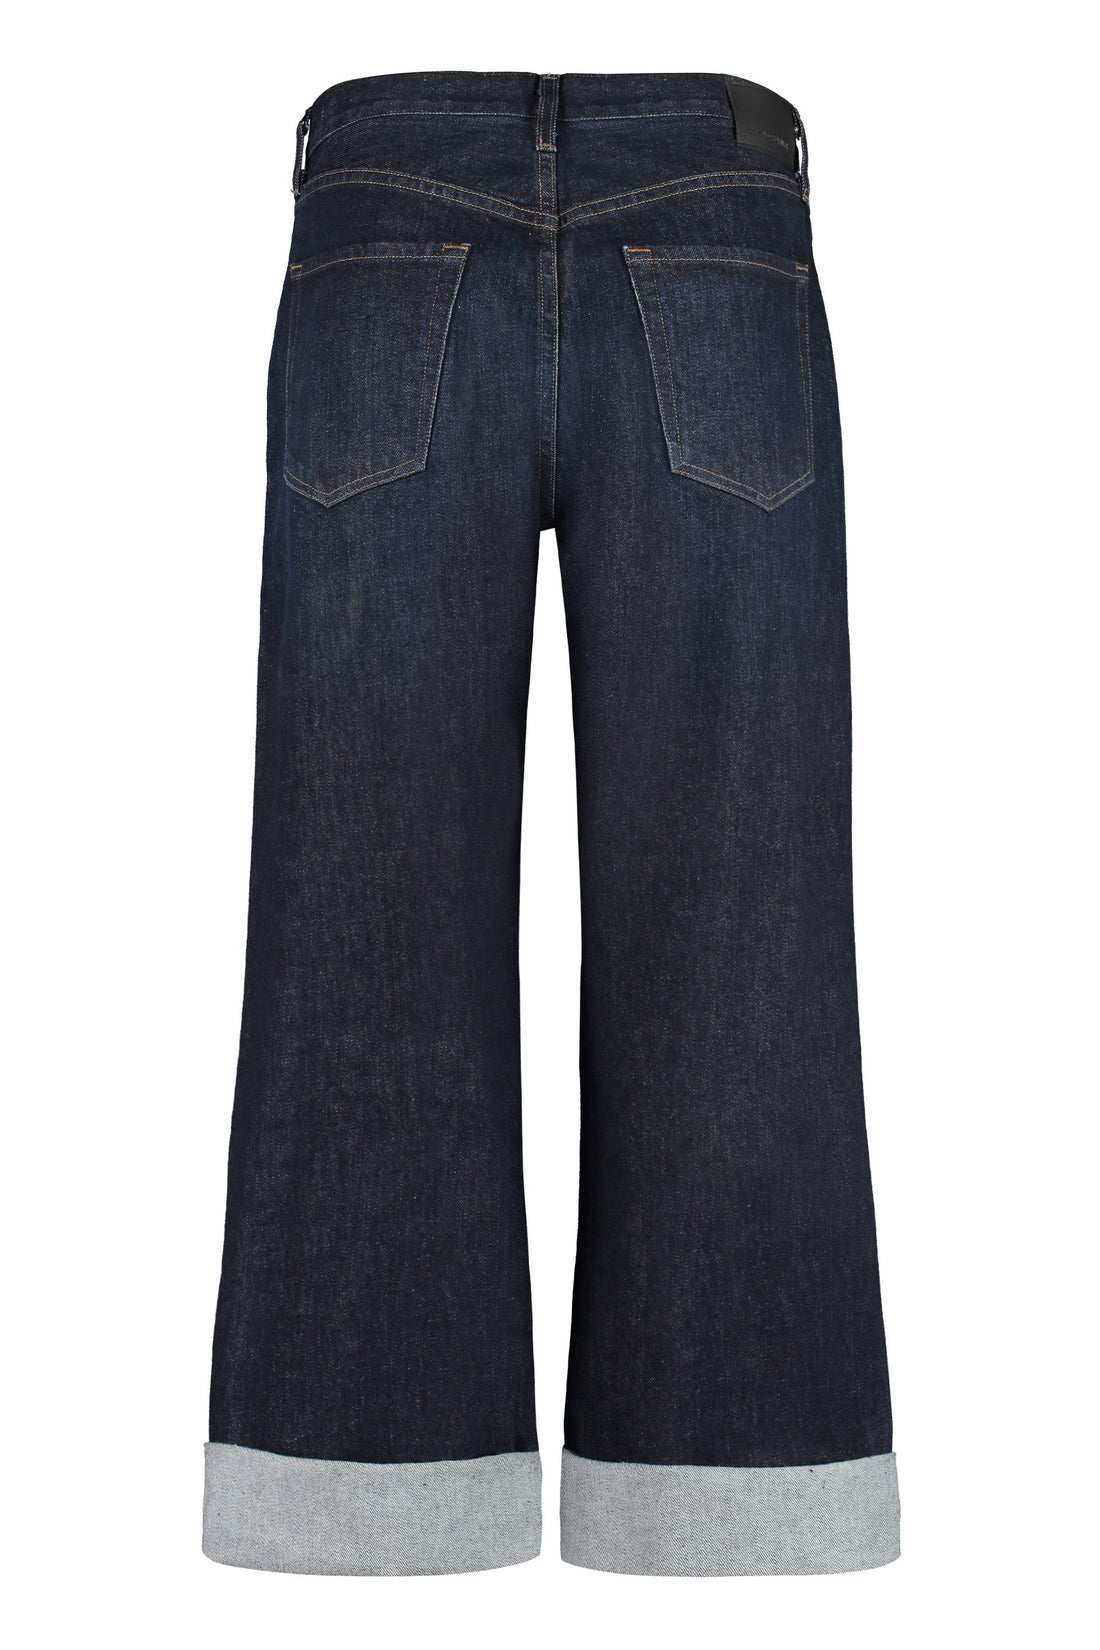 Citizens of Humanity-OUTLET-SALE-Ayla cropped jeans-ARCHIVIST